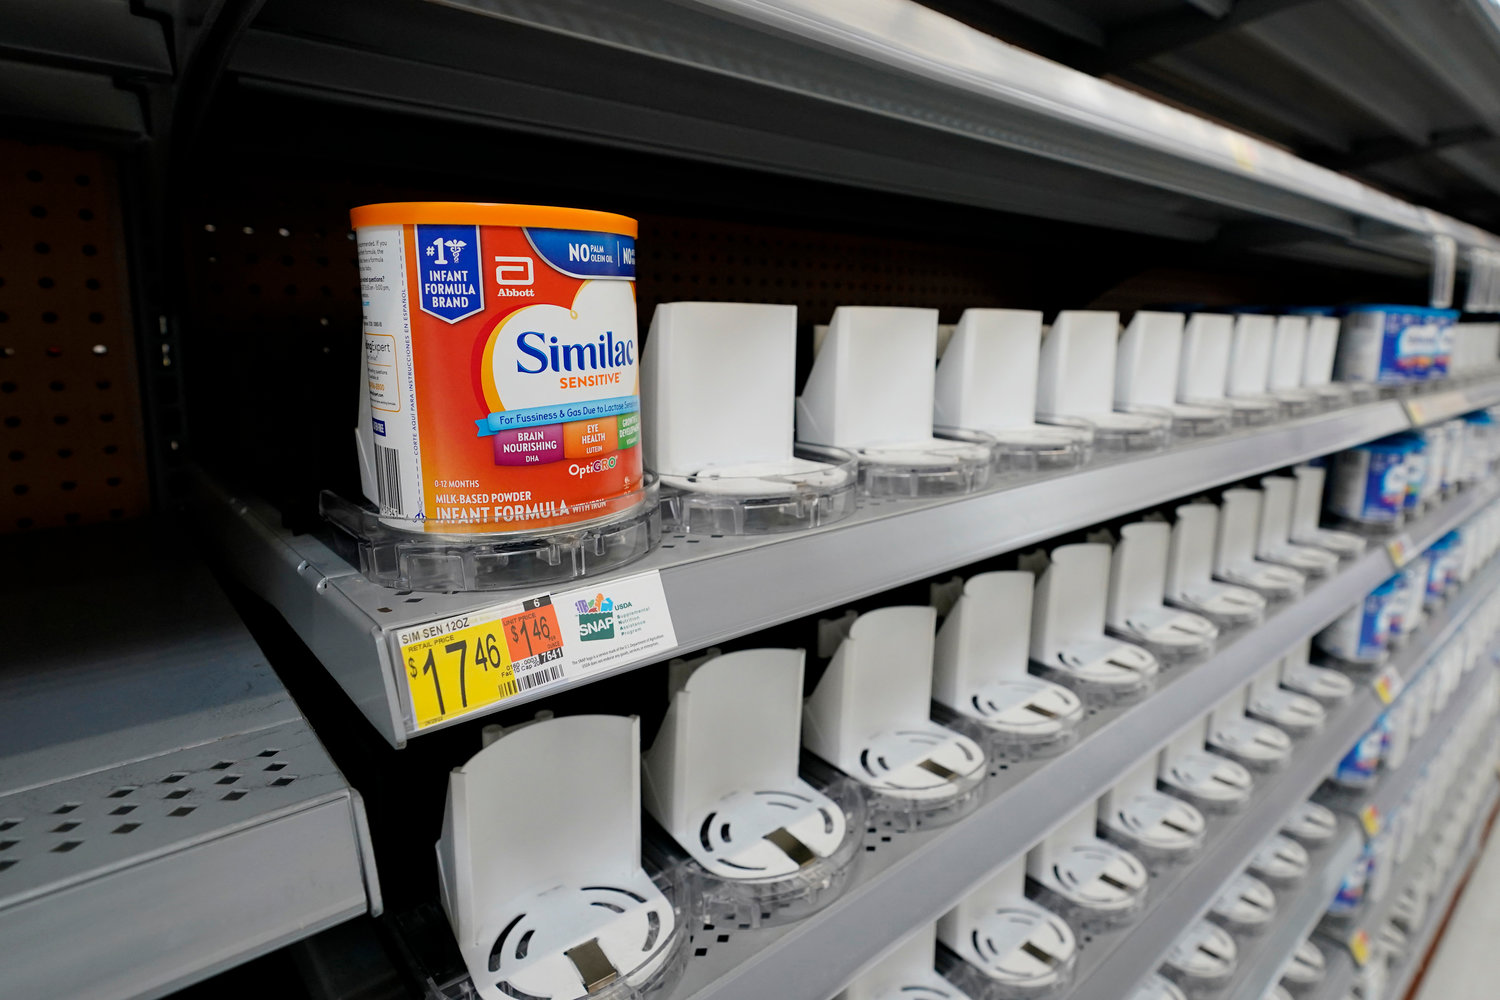 Shelves typically stocked with baby formula sit mostly empty at a store Tuesday.